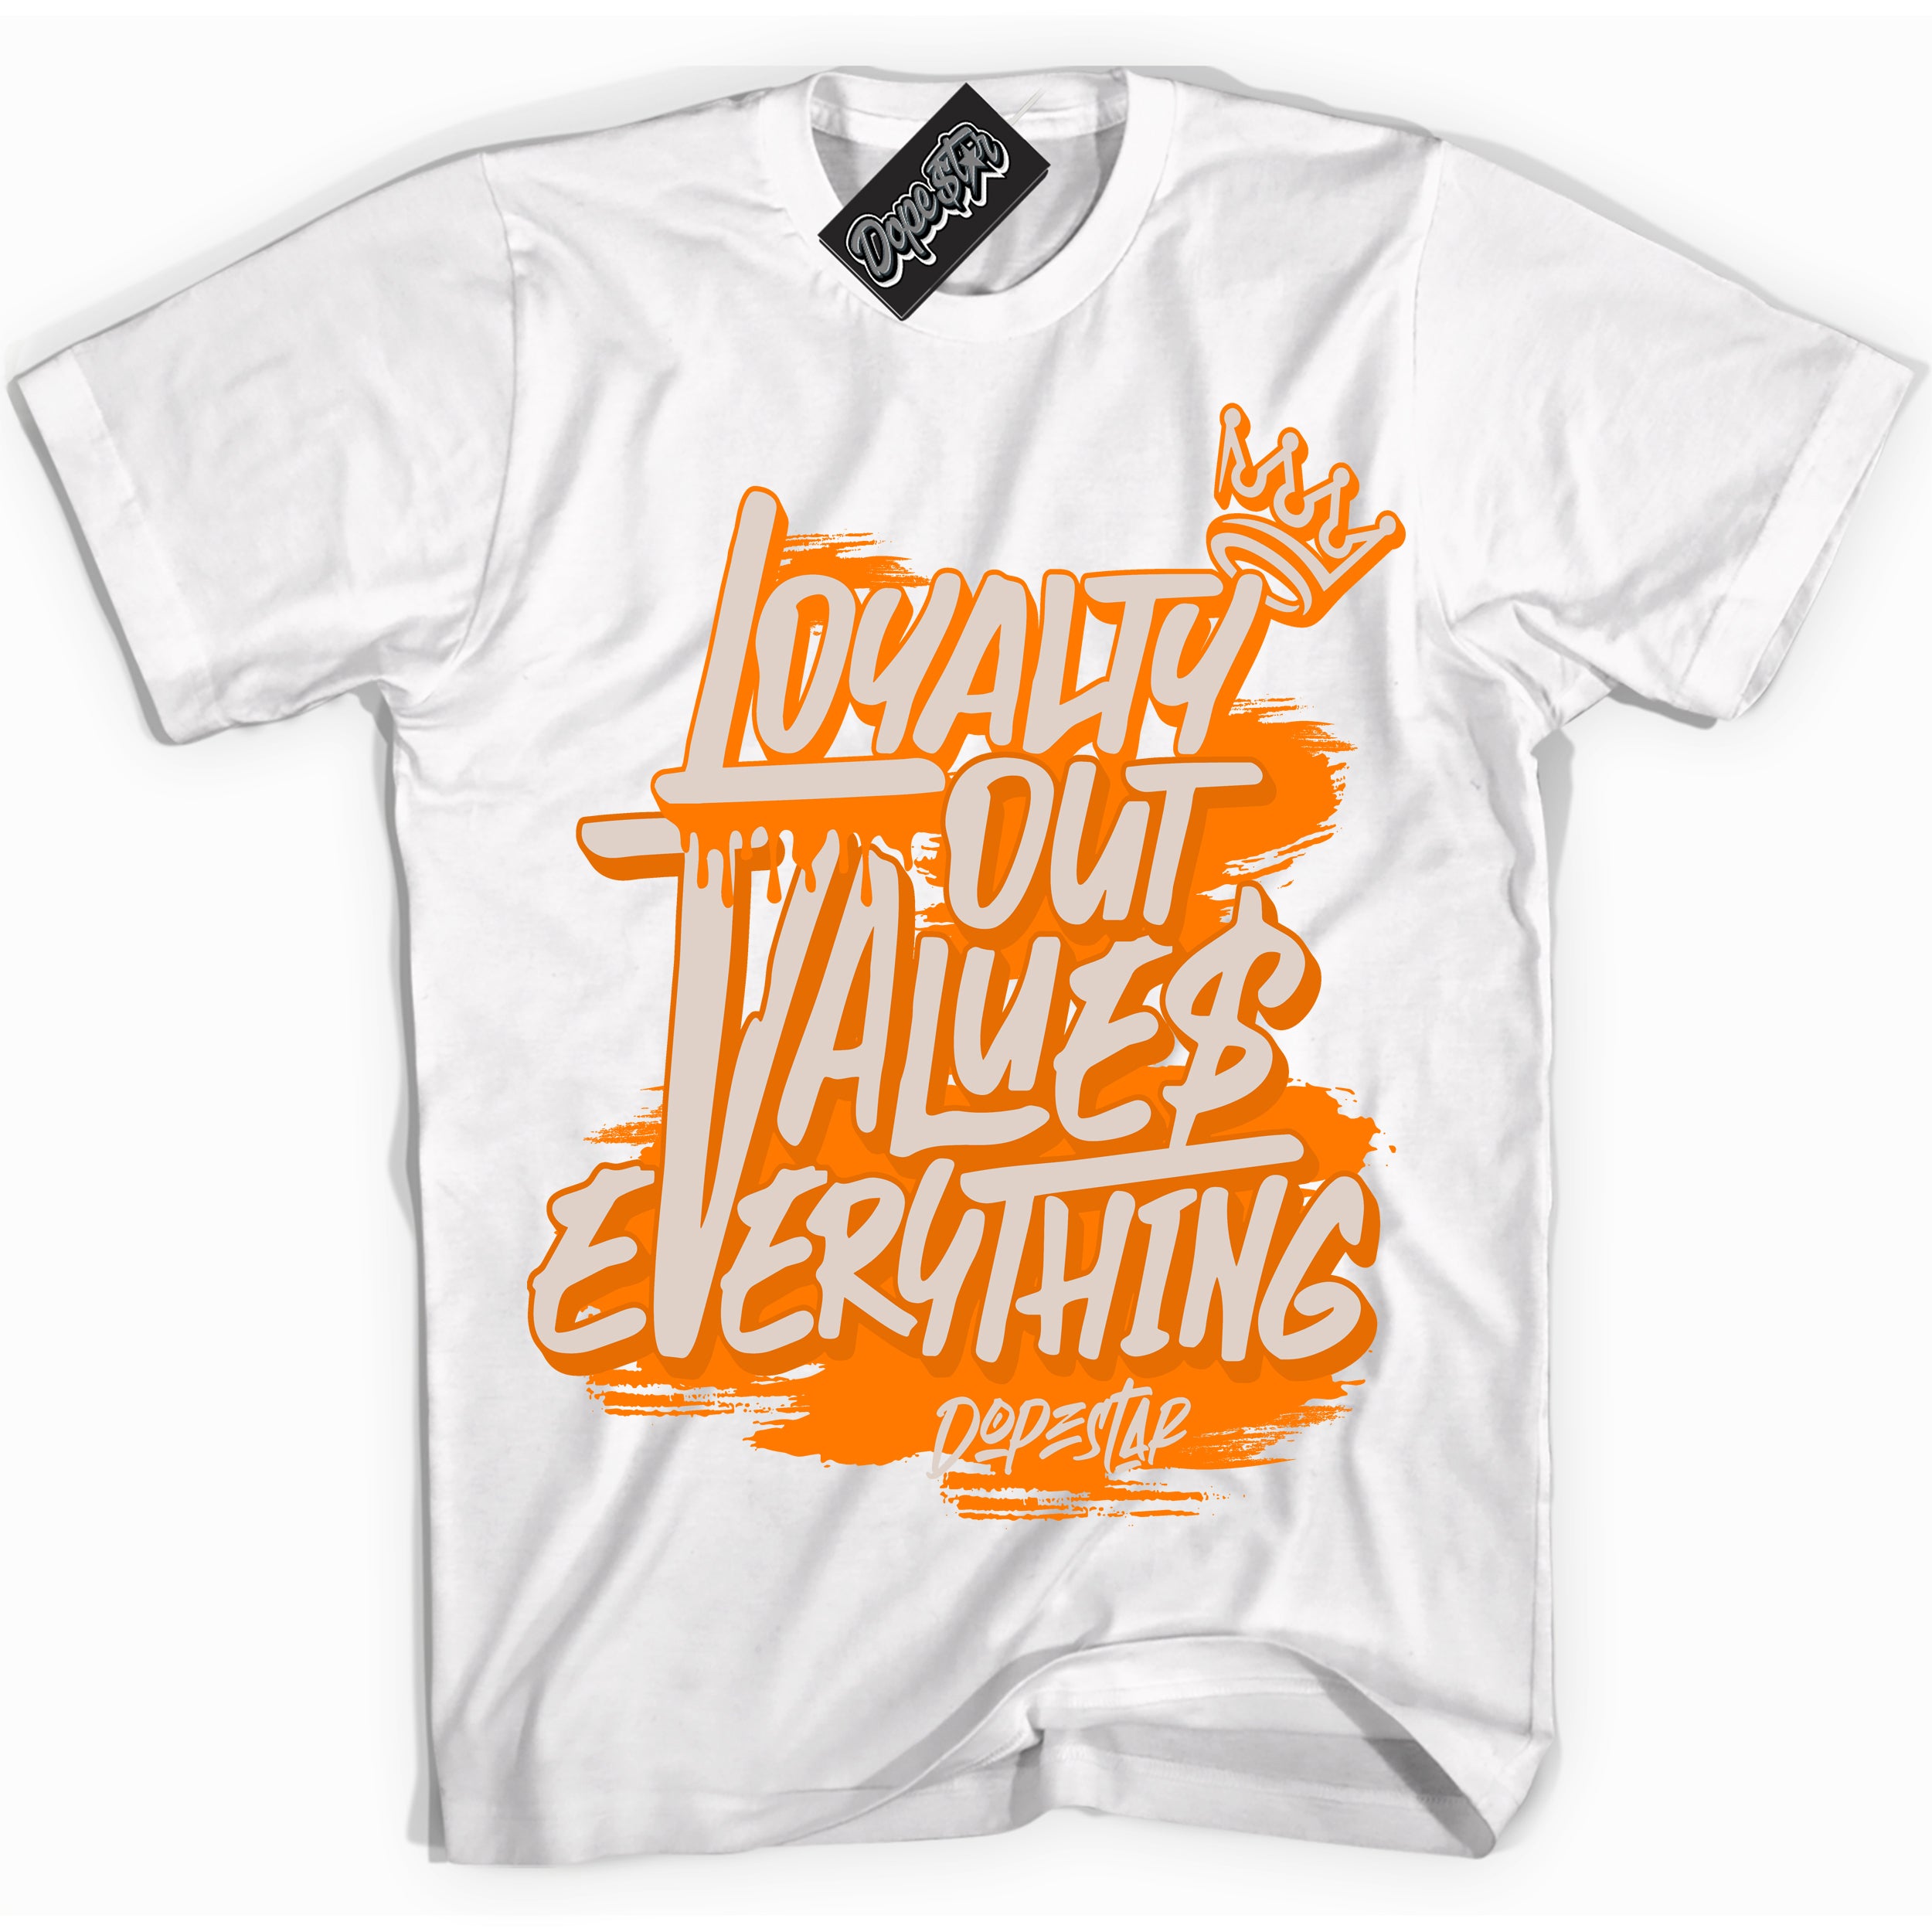 Cool White Shirt with “ Loyalty Out Values Everything” design that perfectly matches Peach Cream Sneakers.